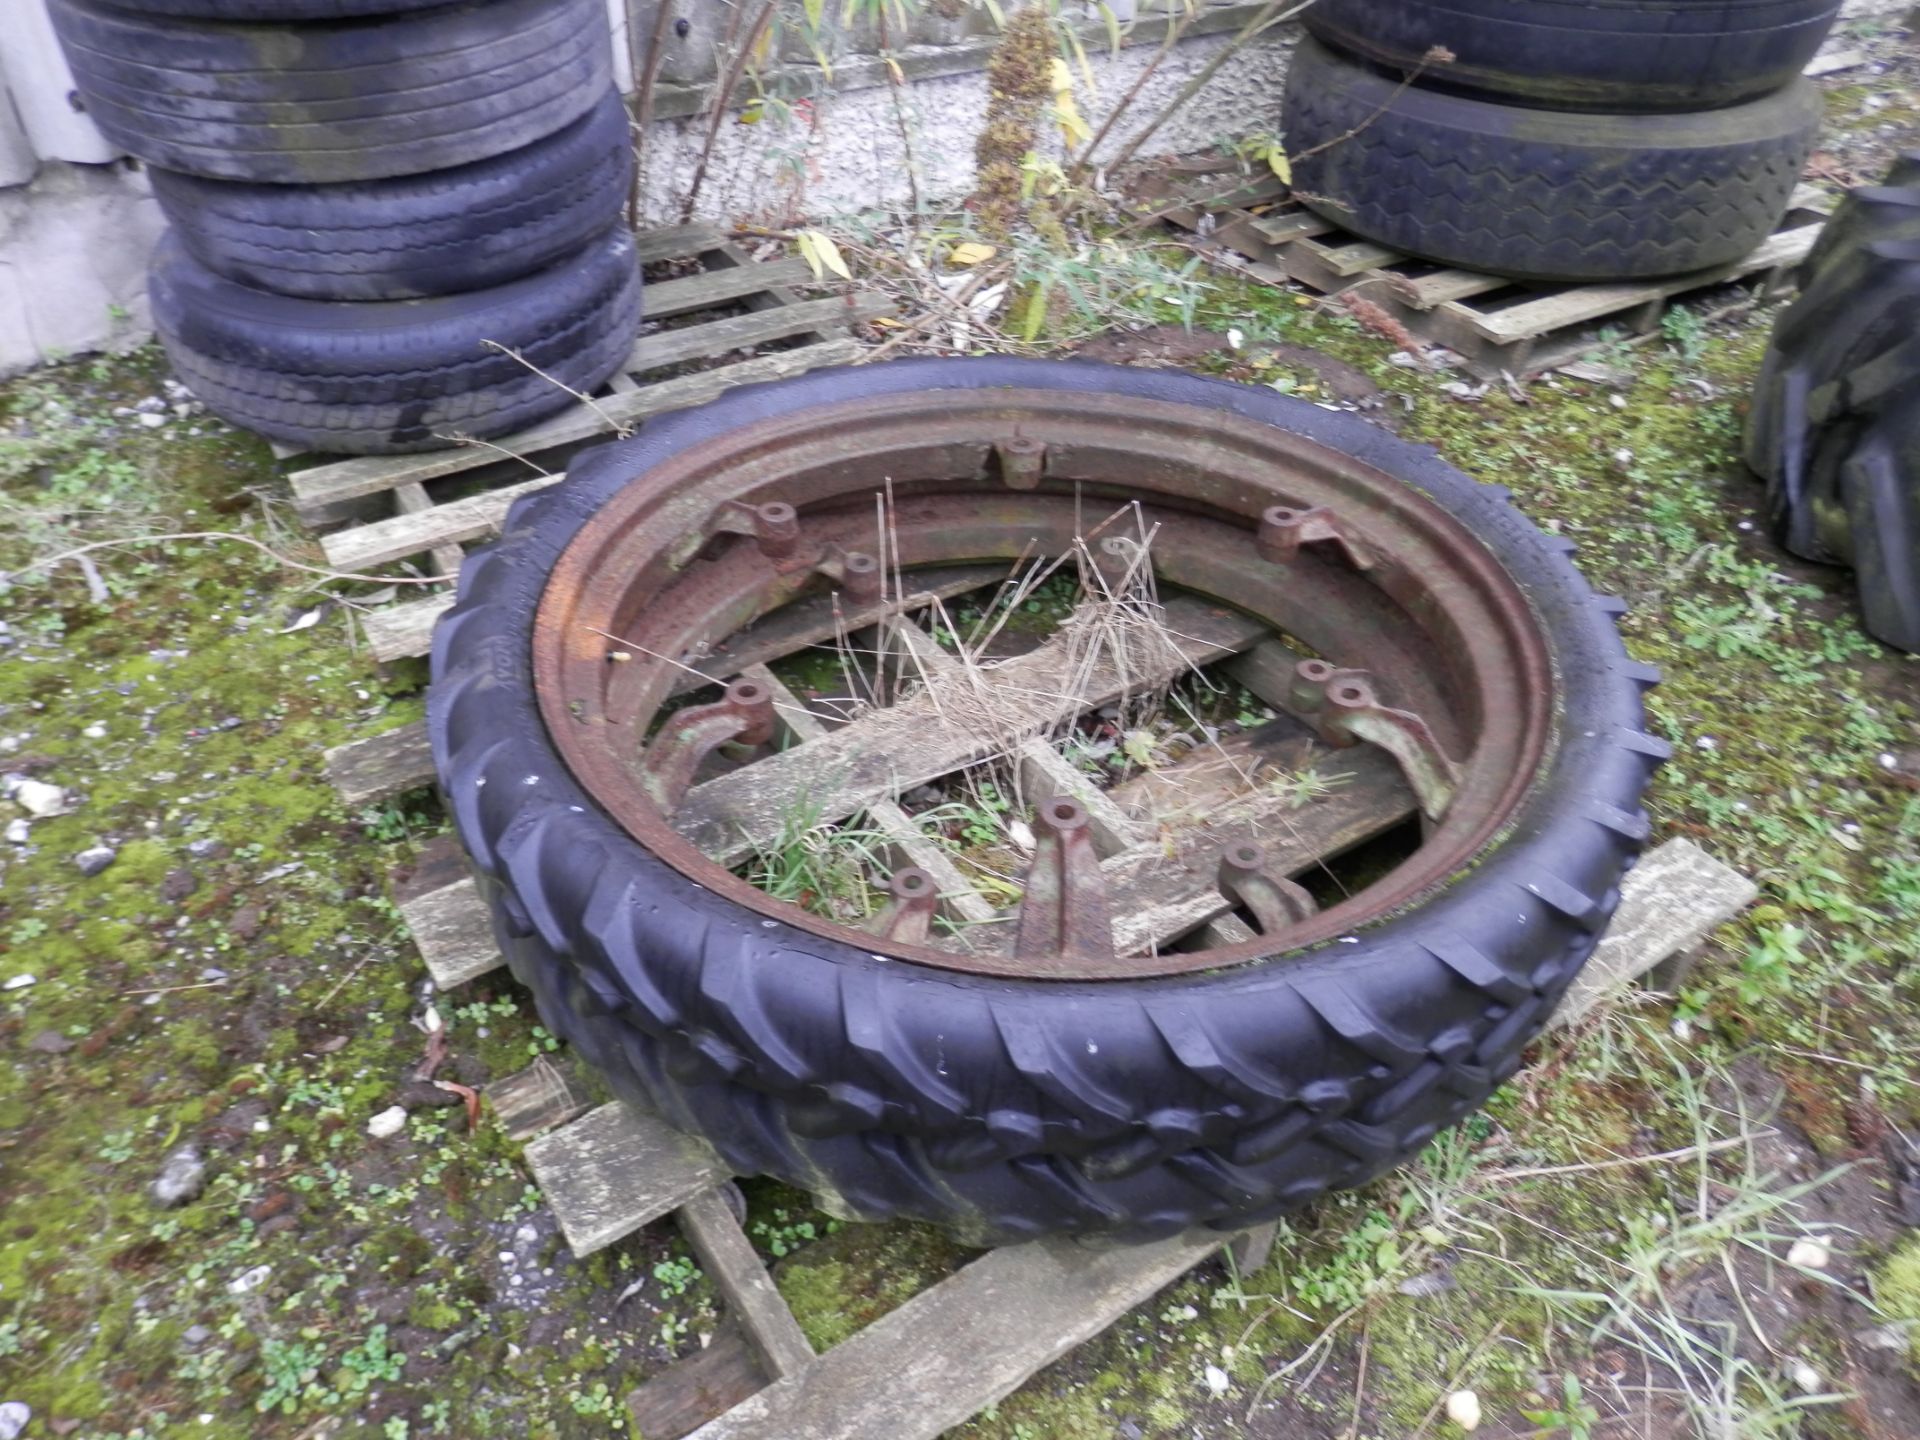 85 + ASSORTED LORRY, CAR & TRAILER TYRES & WHEELS, AS PICTURED. BUYER TO COLLECT COMPLETE - Image 4 of 10